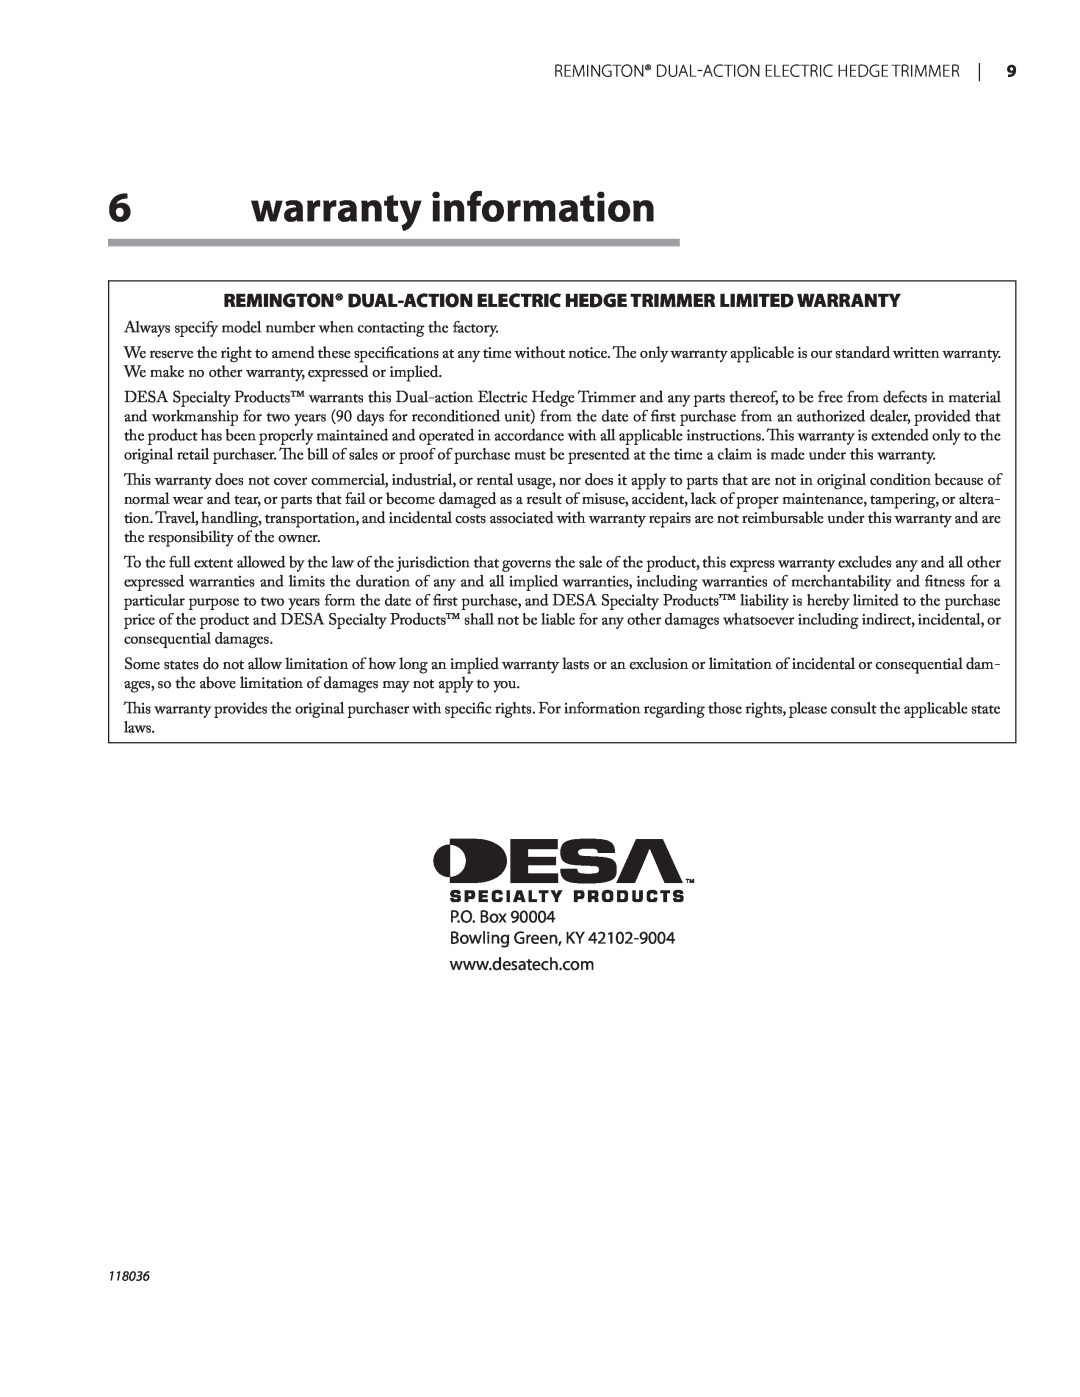 Remington Power Tools HT3218A, HT4022A owner manual warranty information, Remington Dual-Actionelectric Hedge Trimmer 